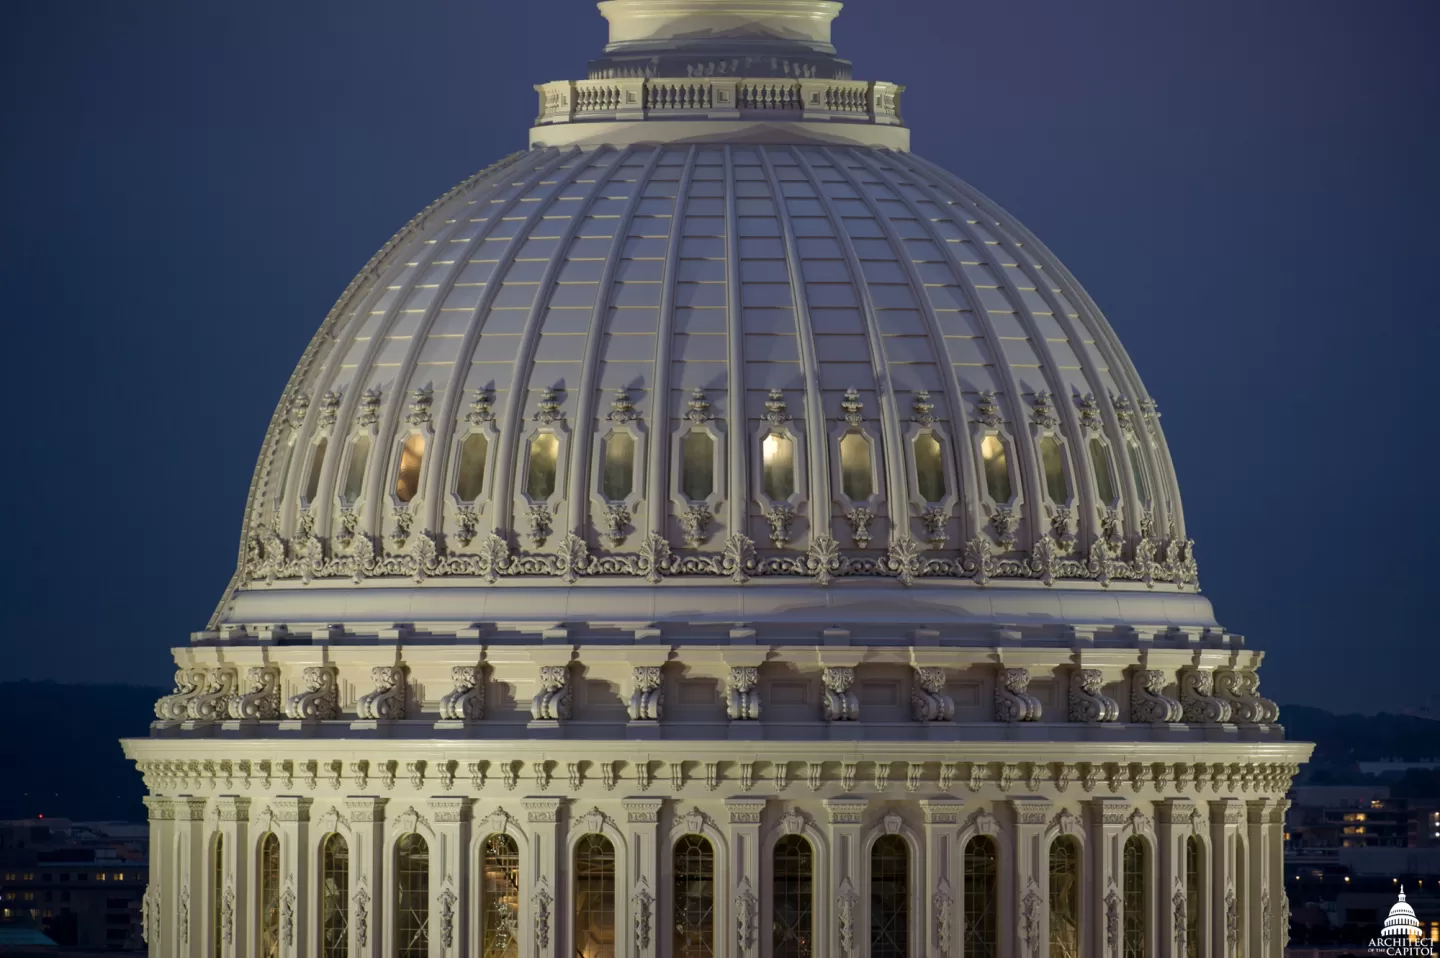 The U.S. Capitol Dome's cupola at night.